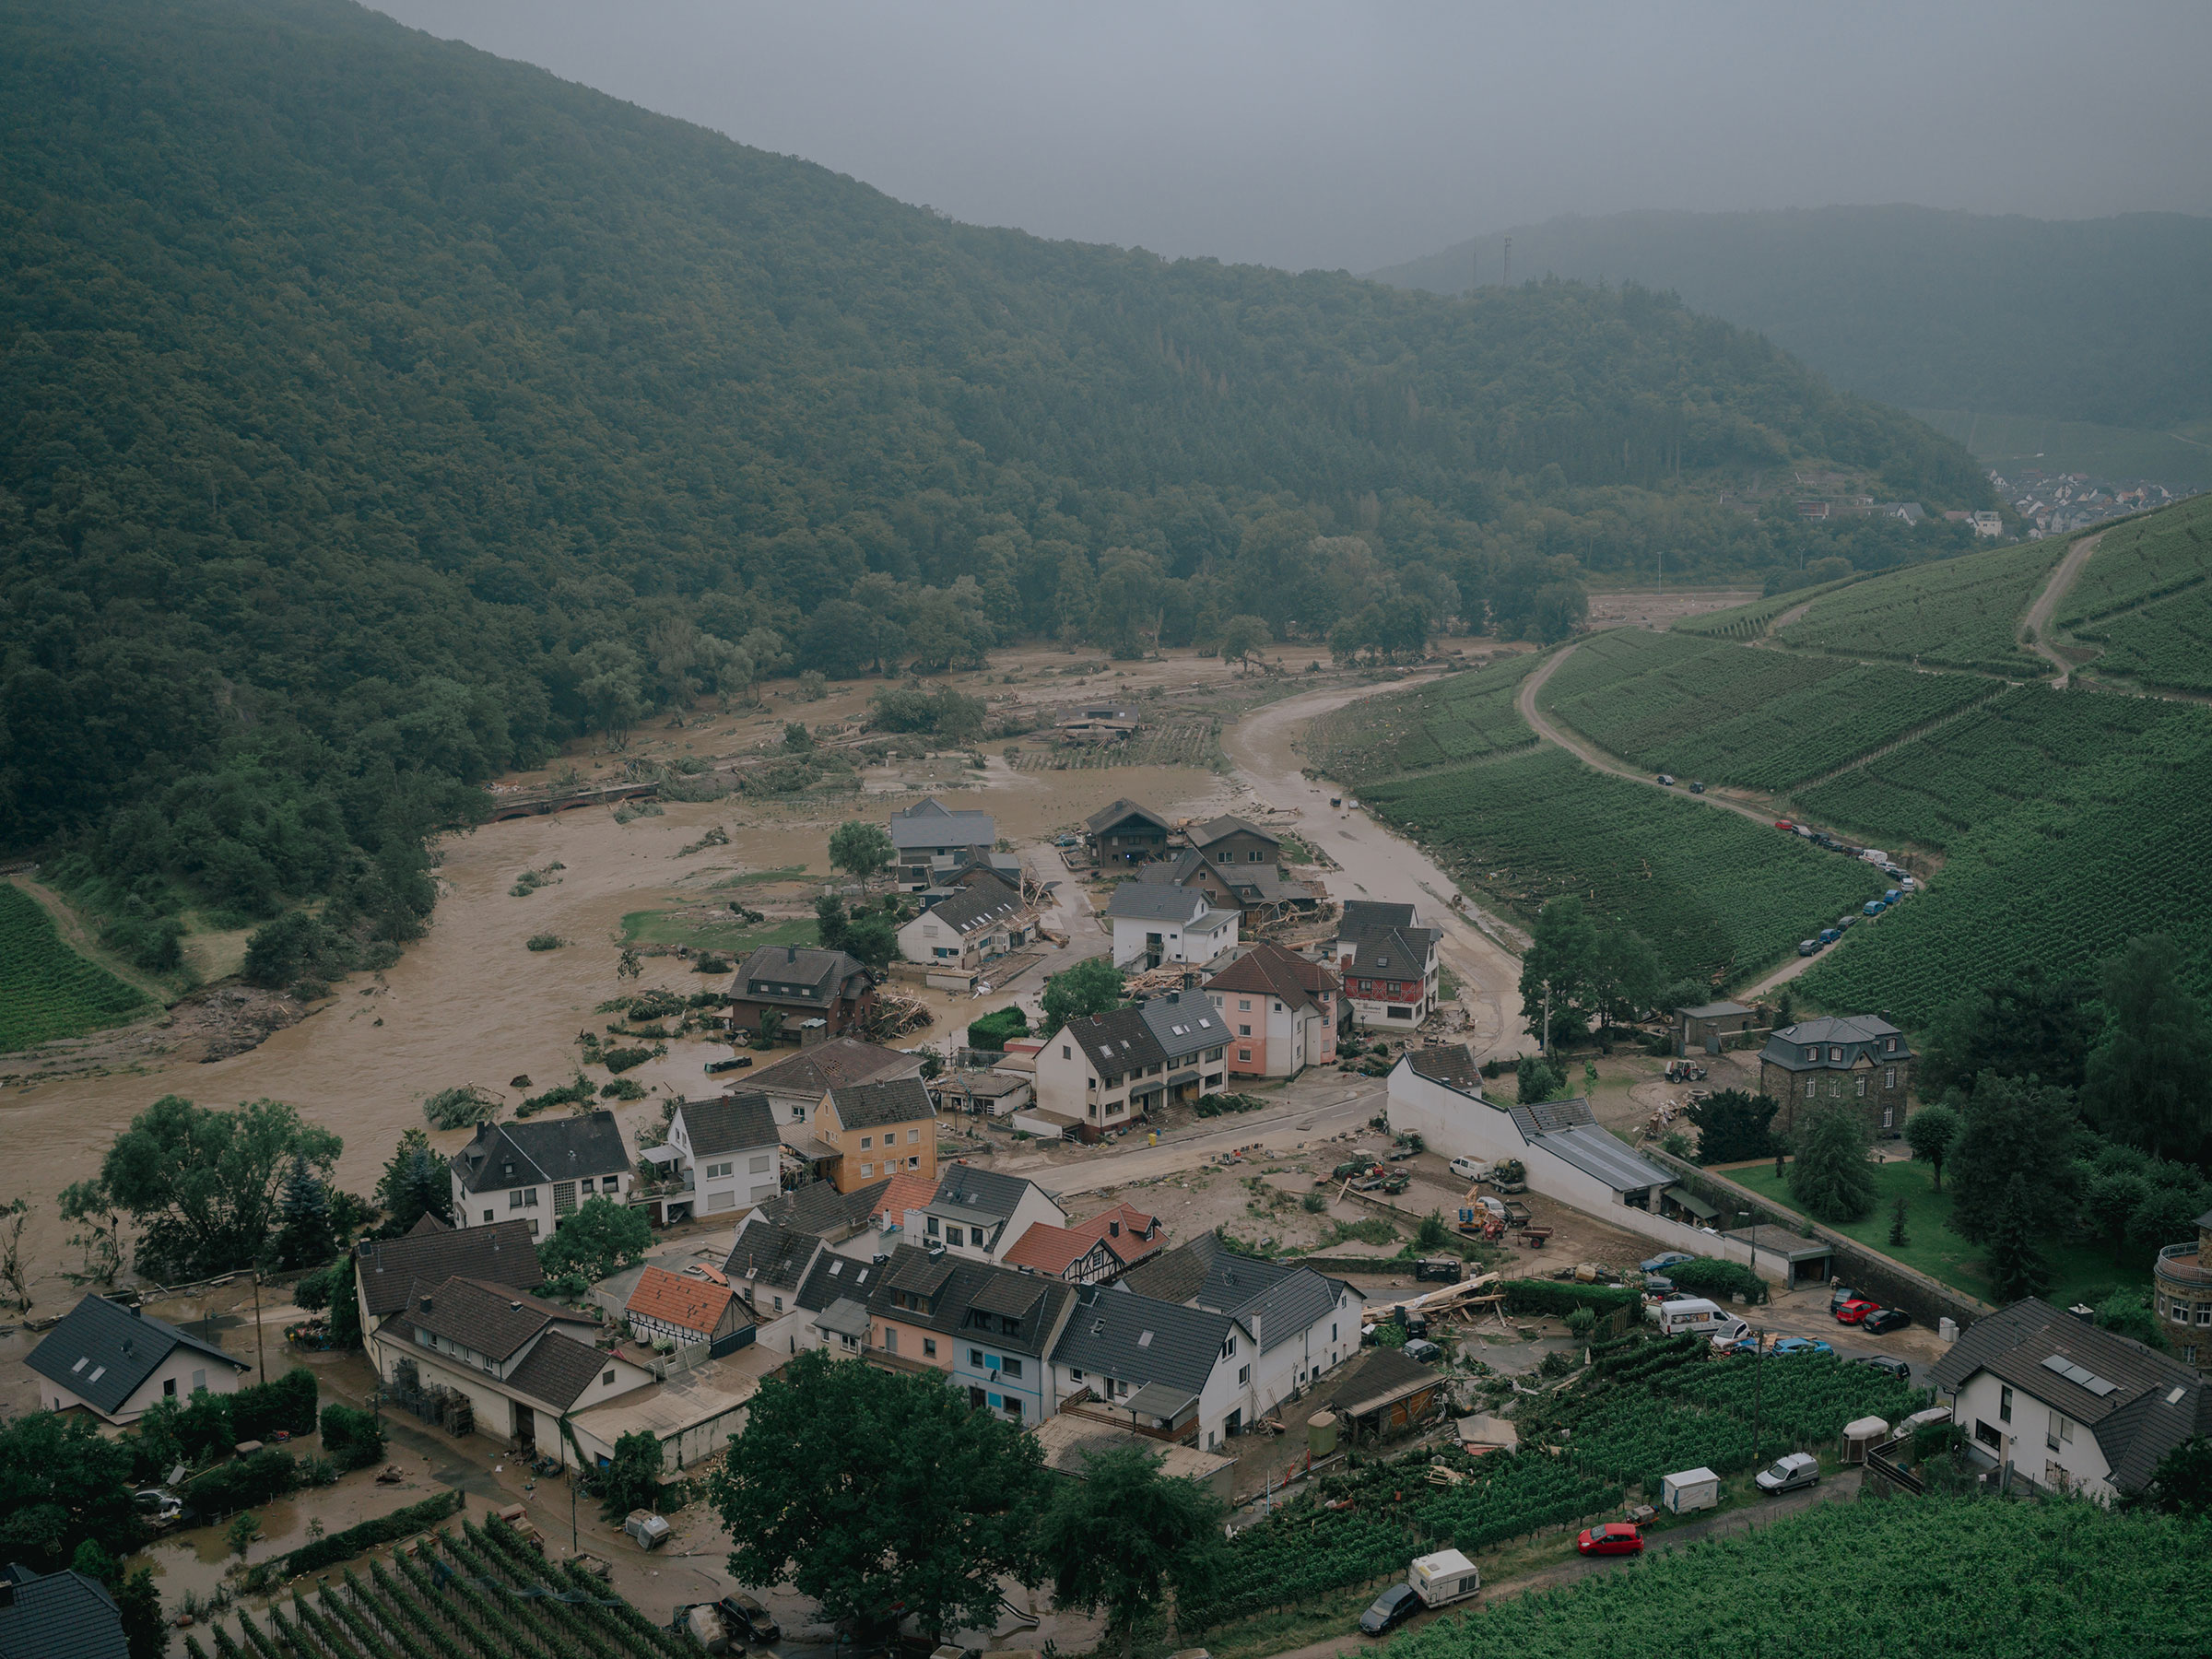 A view of the flood-damaged village of Dernau from a hillside on July 15. (DOCKS Collective)